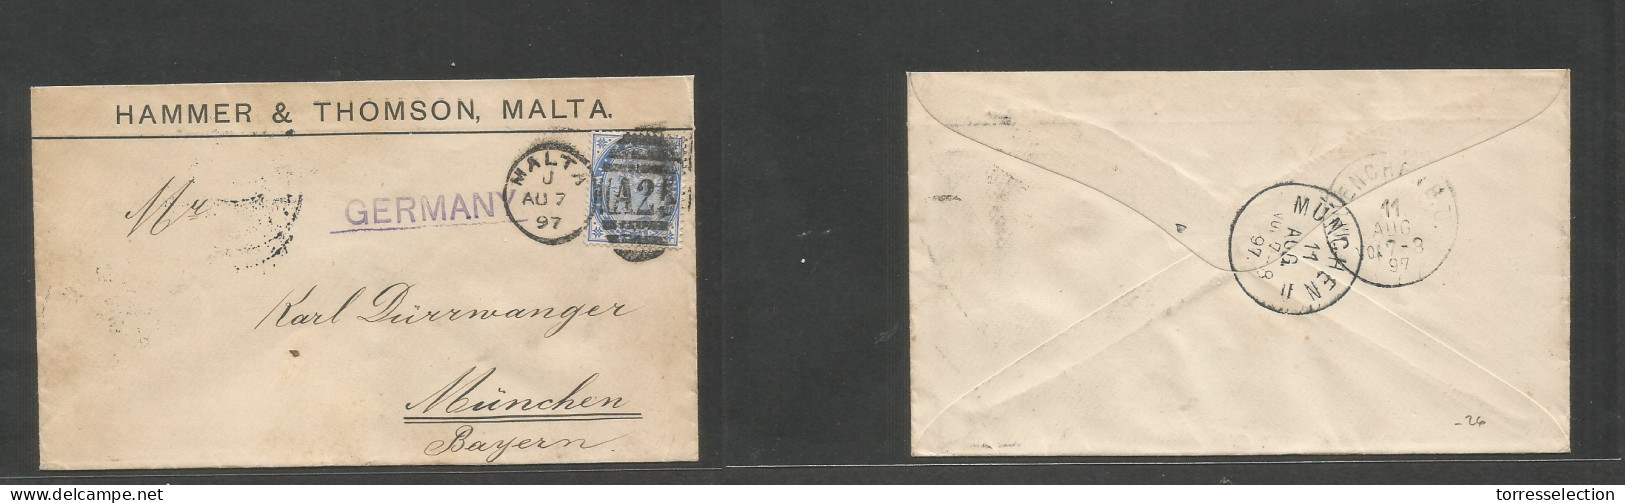 BC - Malta. 1897 (Aug 7) GPO - Germany, Munich (11 Aug) Single 2 1/2d Blue QV Comercial Fkd Env, Tied A26 Cds. Fine. - Other & Unclassified